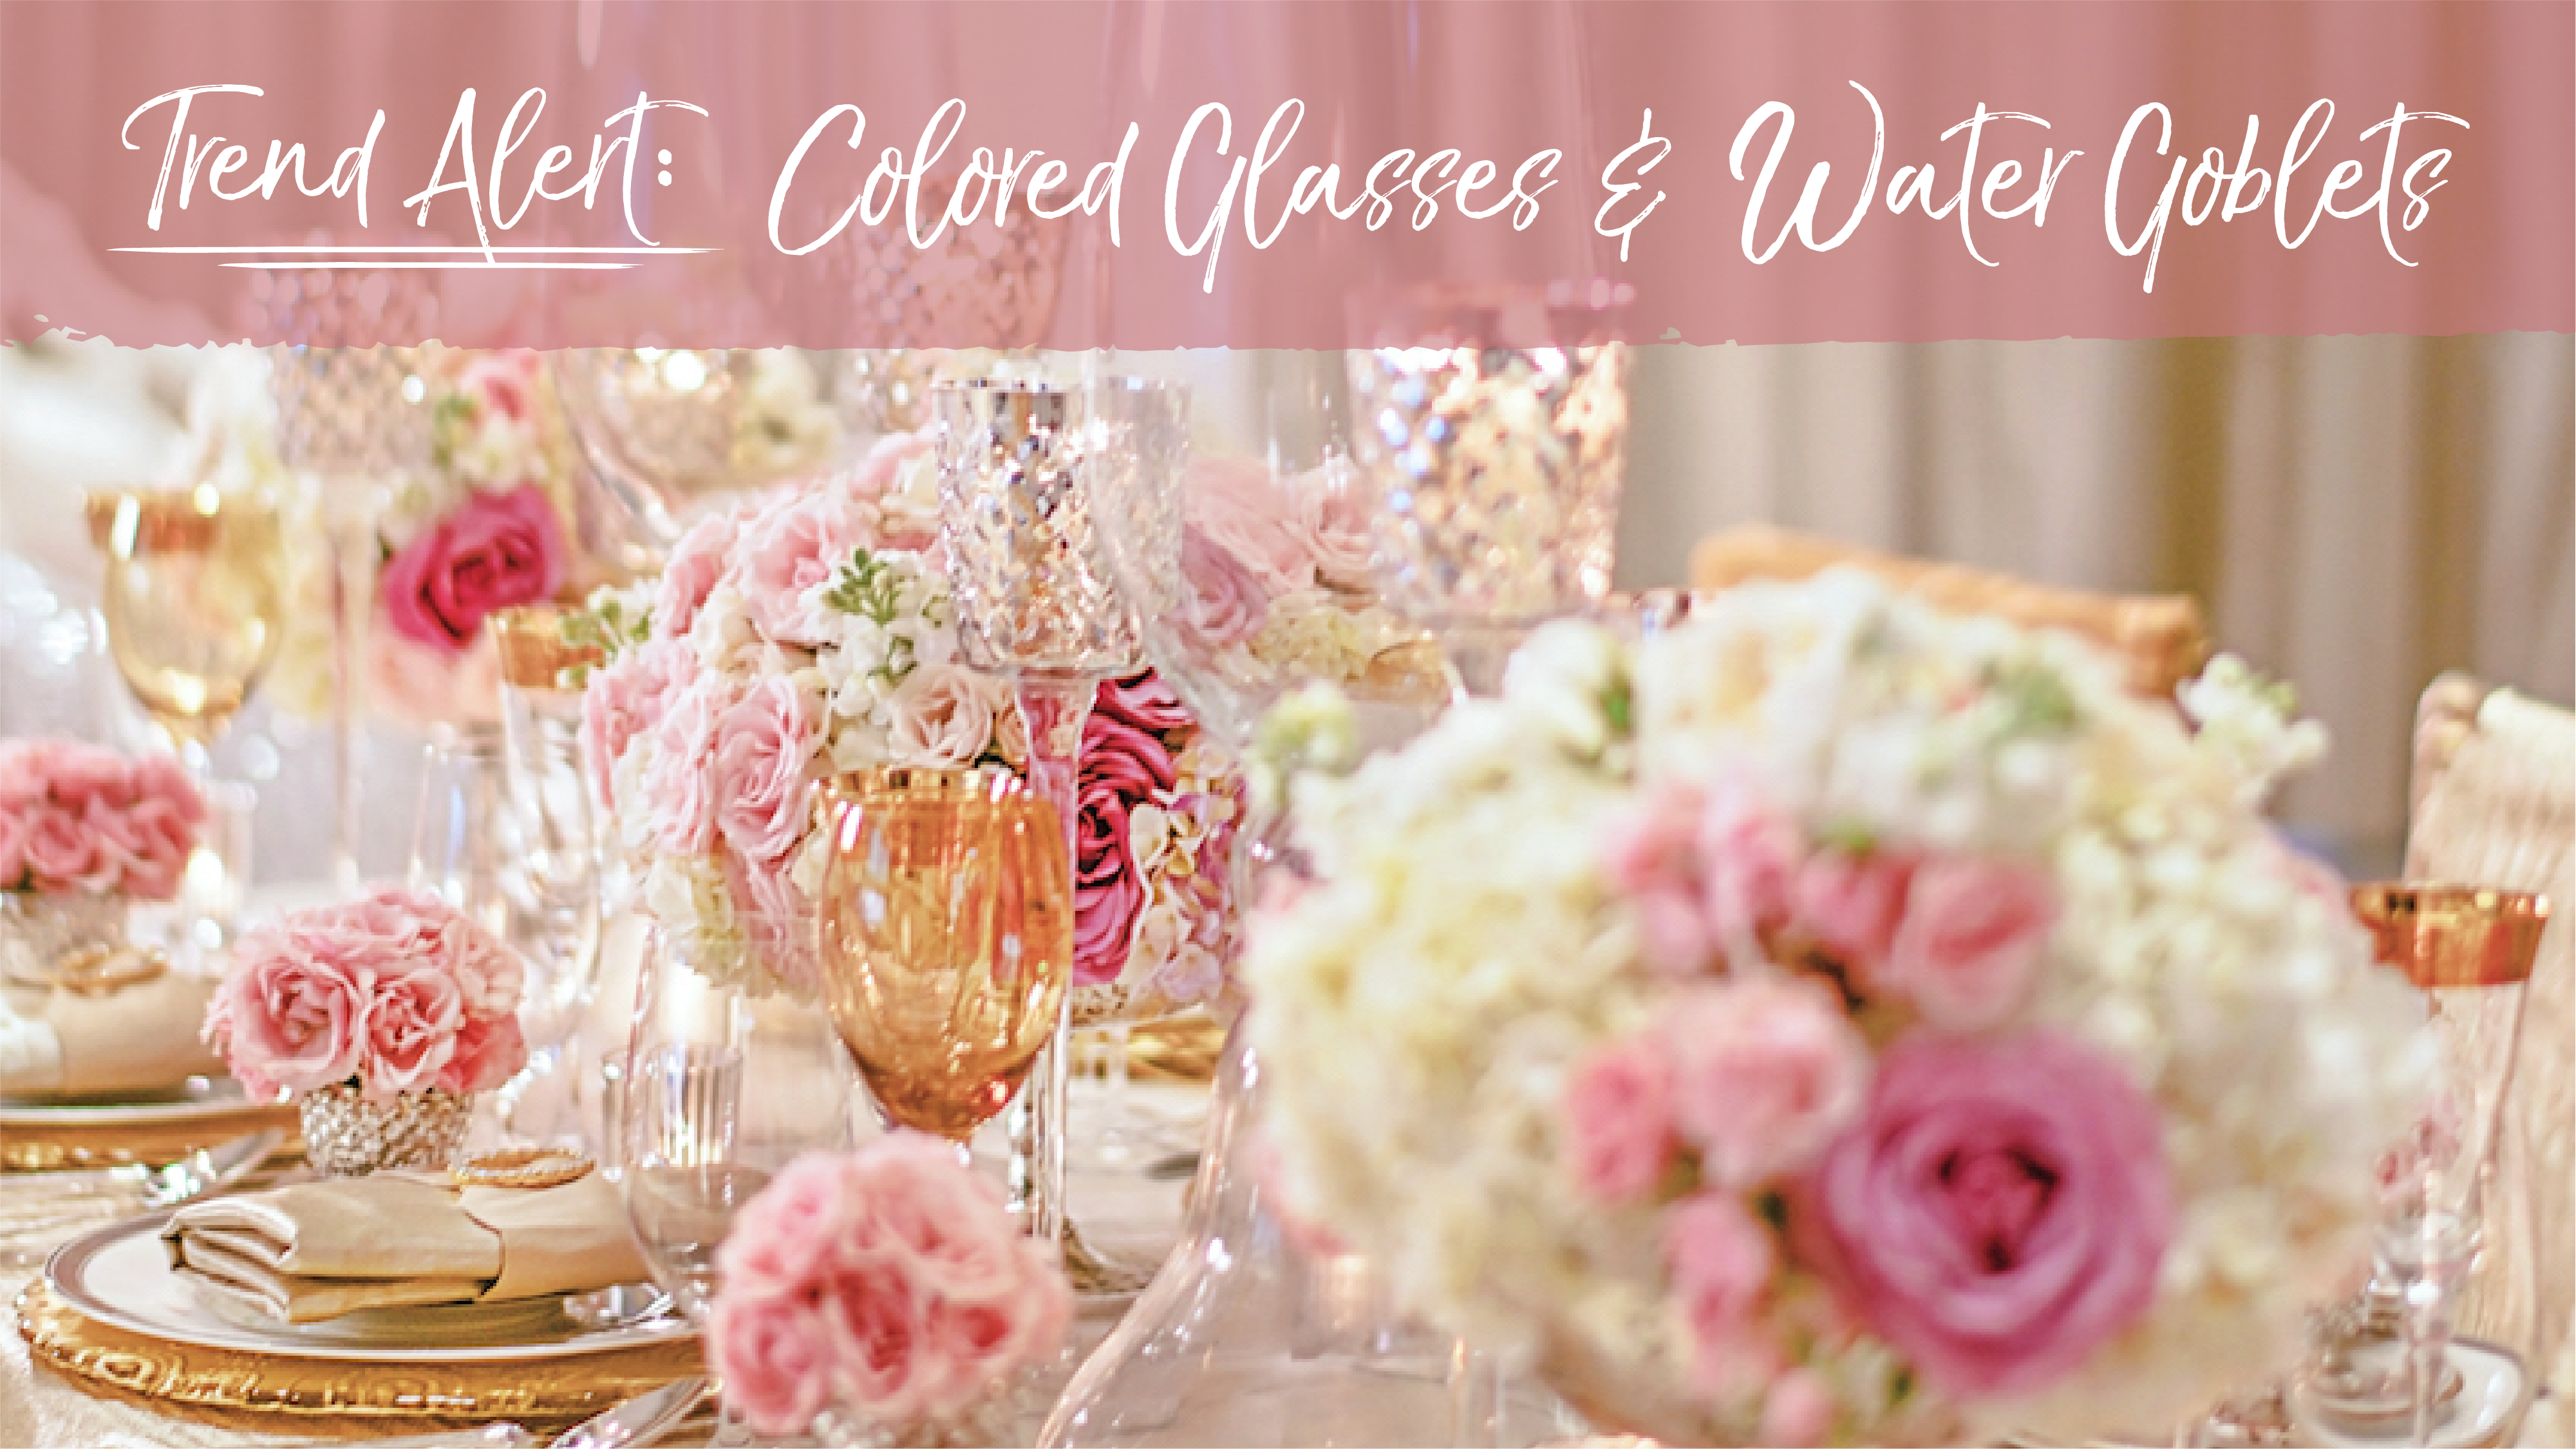 Trend Alert: Colored Glasses & Water Goblets